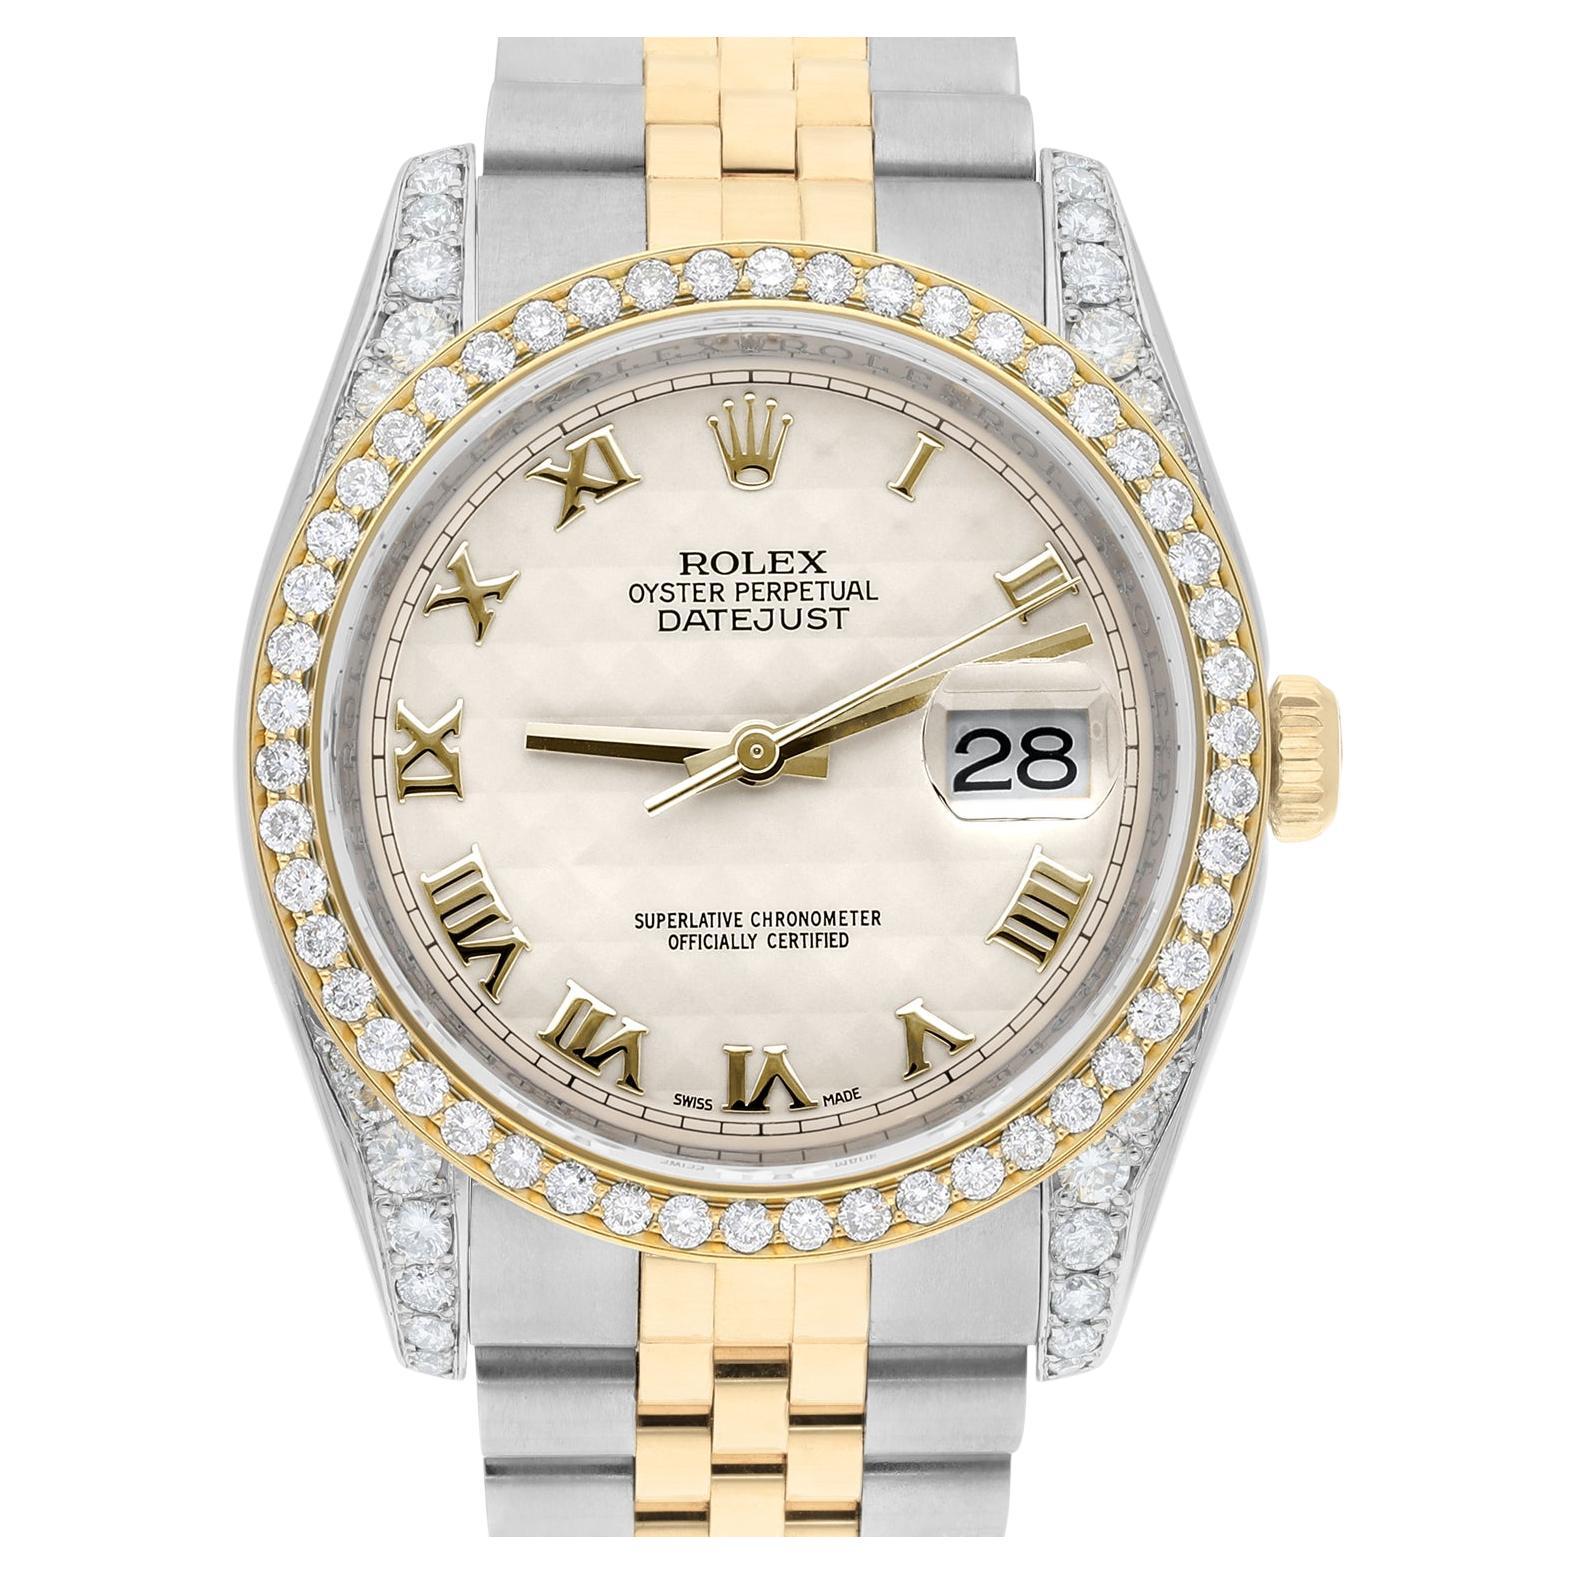 Rolex Datejust 36 Diamond Gold and Steel 116233 Ivory Pyramid Dial Jubilee Watch